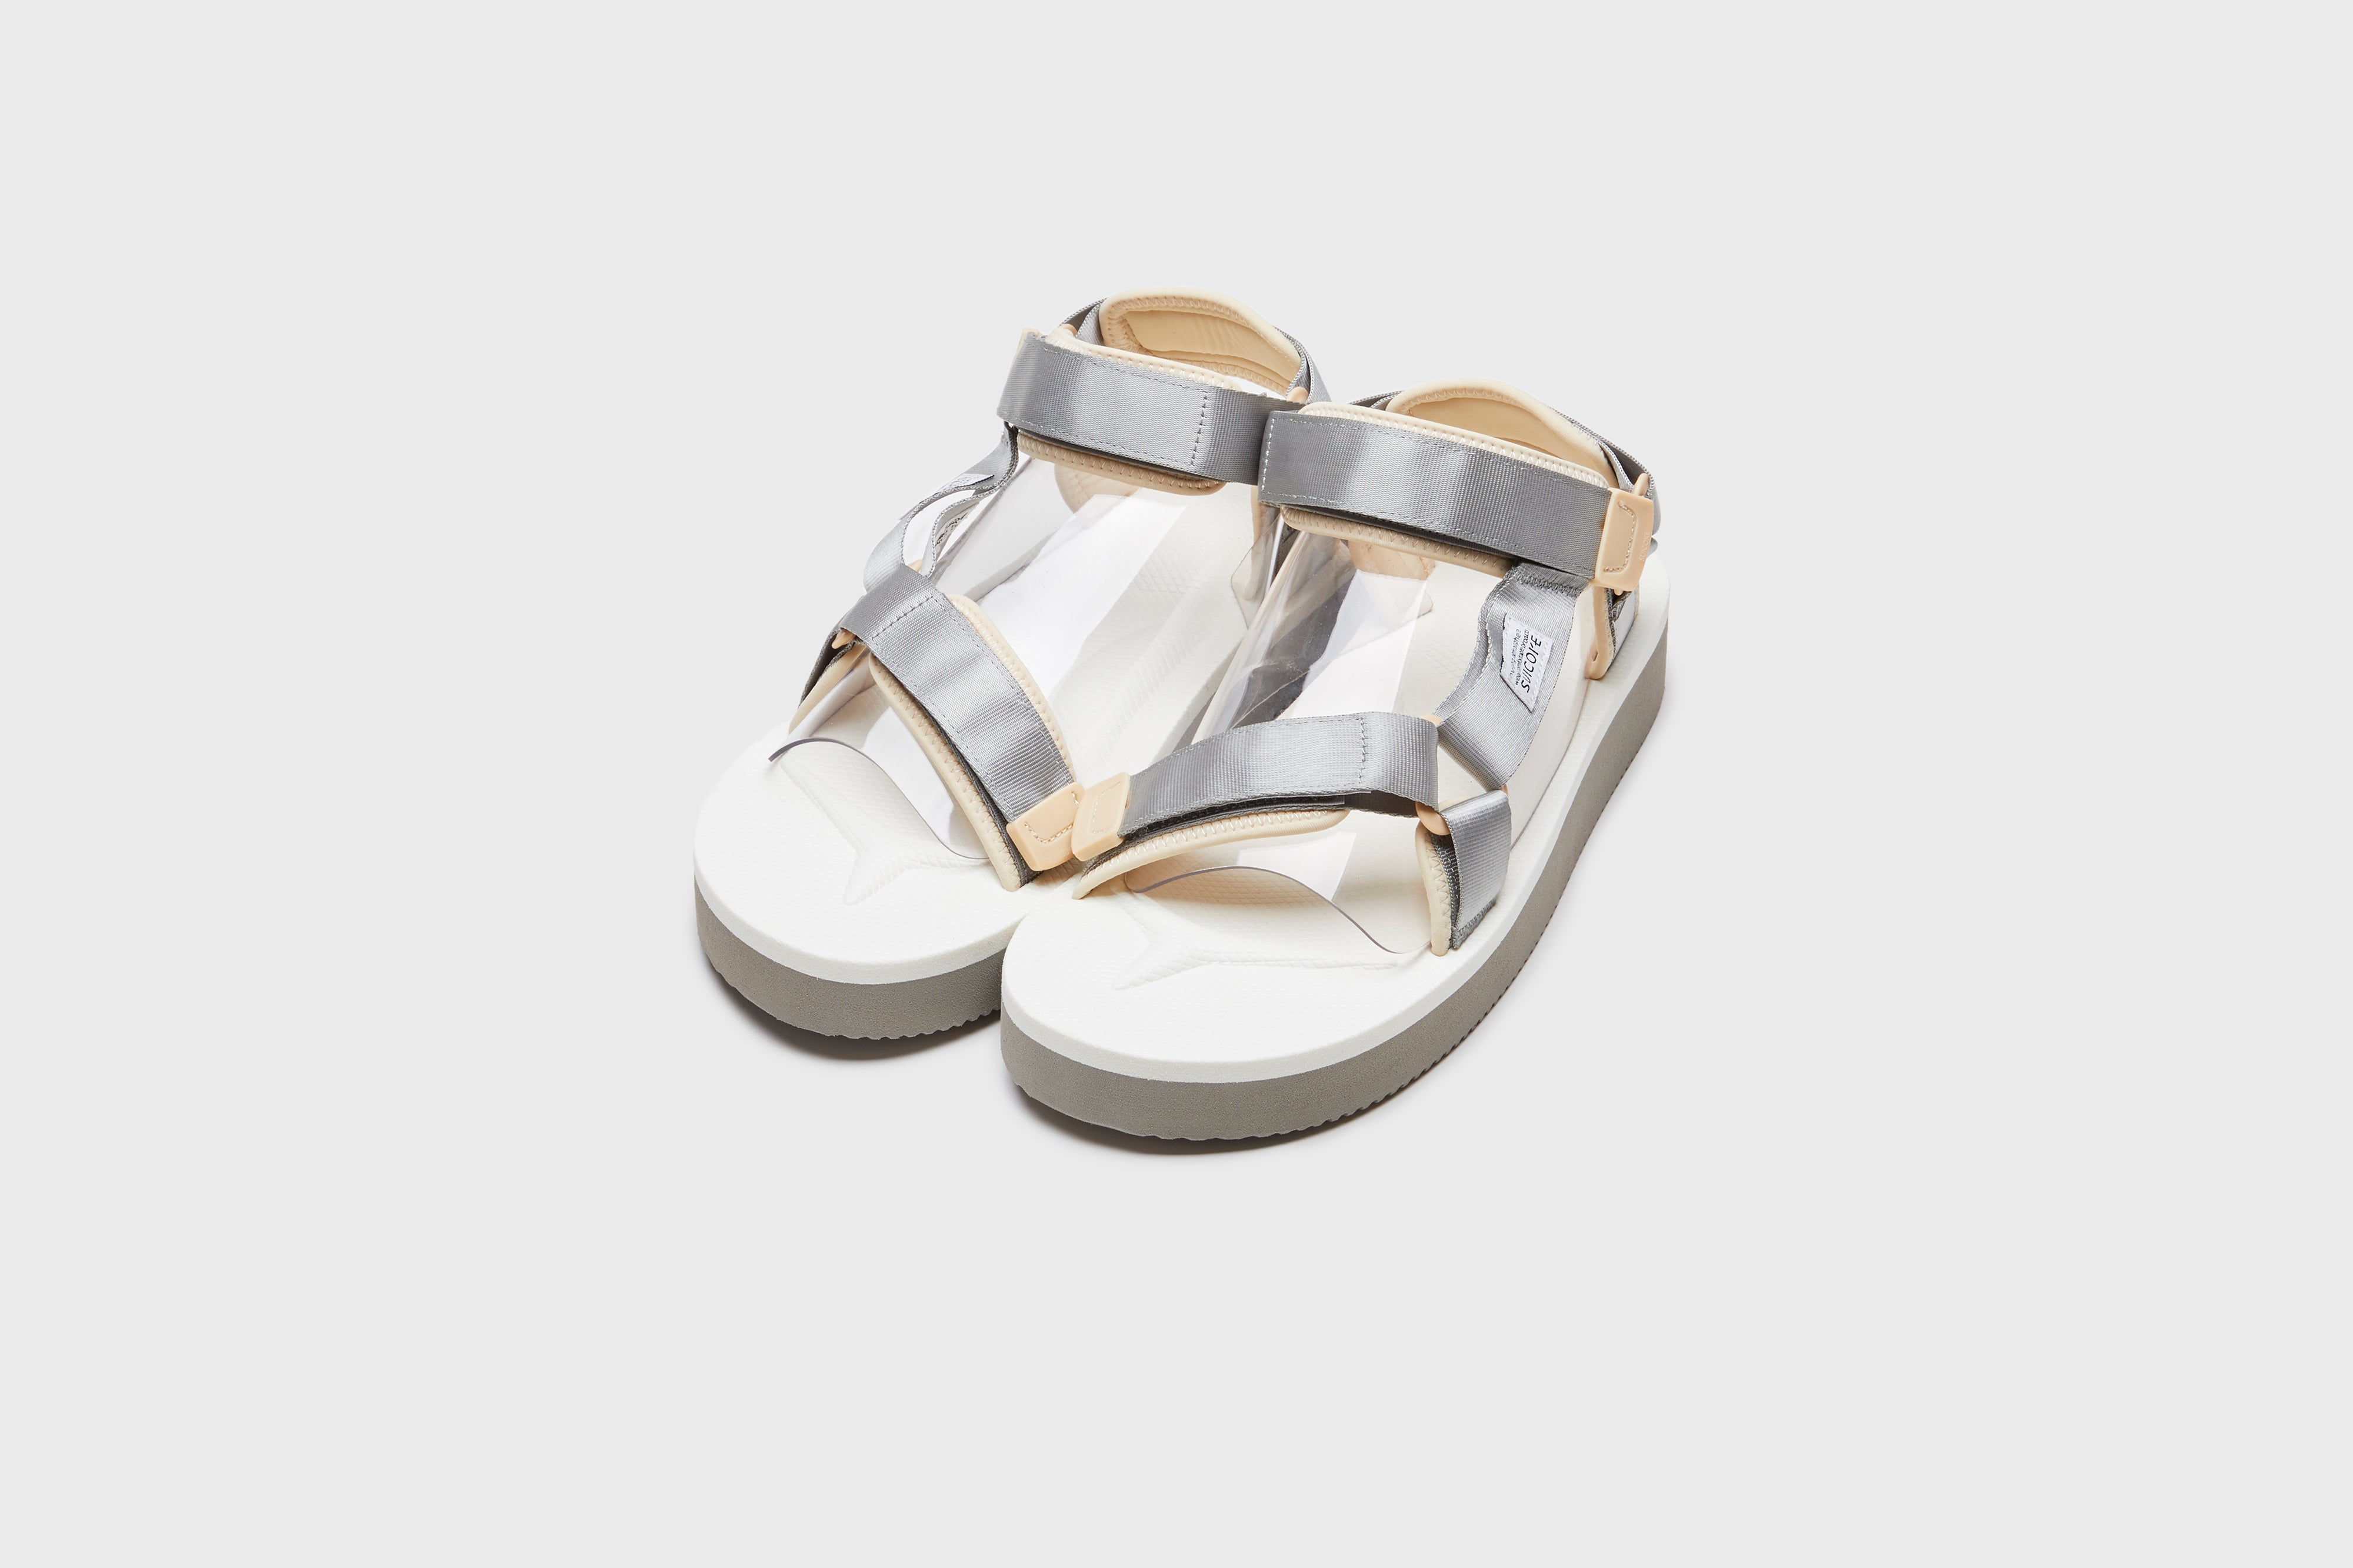 SUICOKE DEPA-2PO sandals with gray & white nylon upper, gray & white midsole and sole, strap and logo patch. From Spring/Summer 2023 collection on eightywingold Web Store, an official partner of SUICOKE. OG-022-2PO GRAY X WHITE